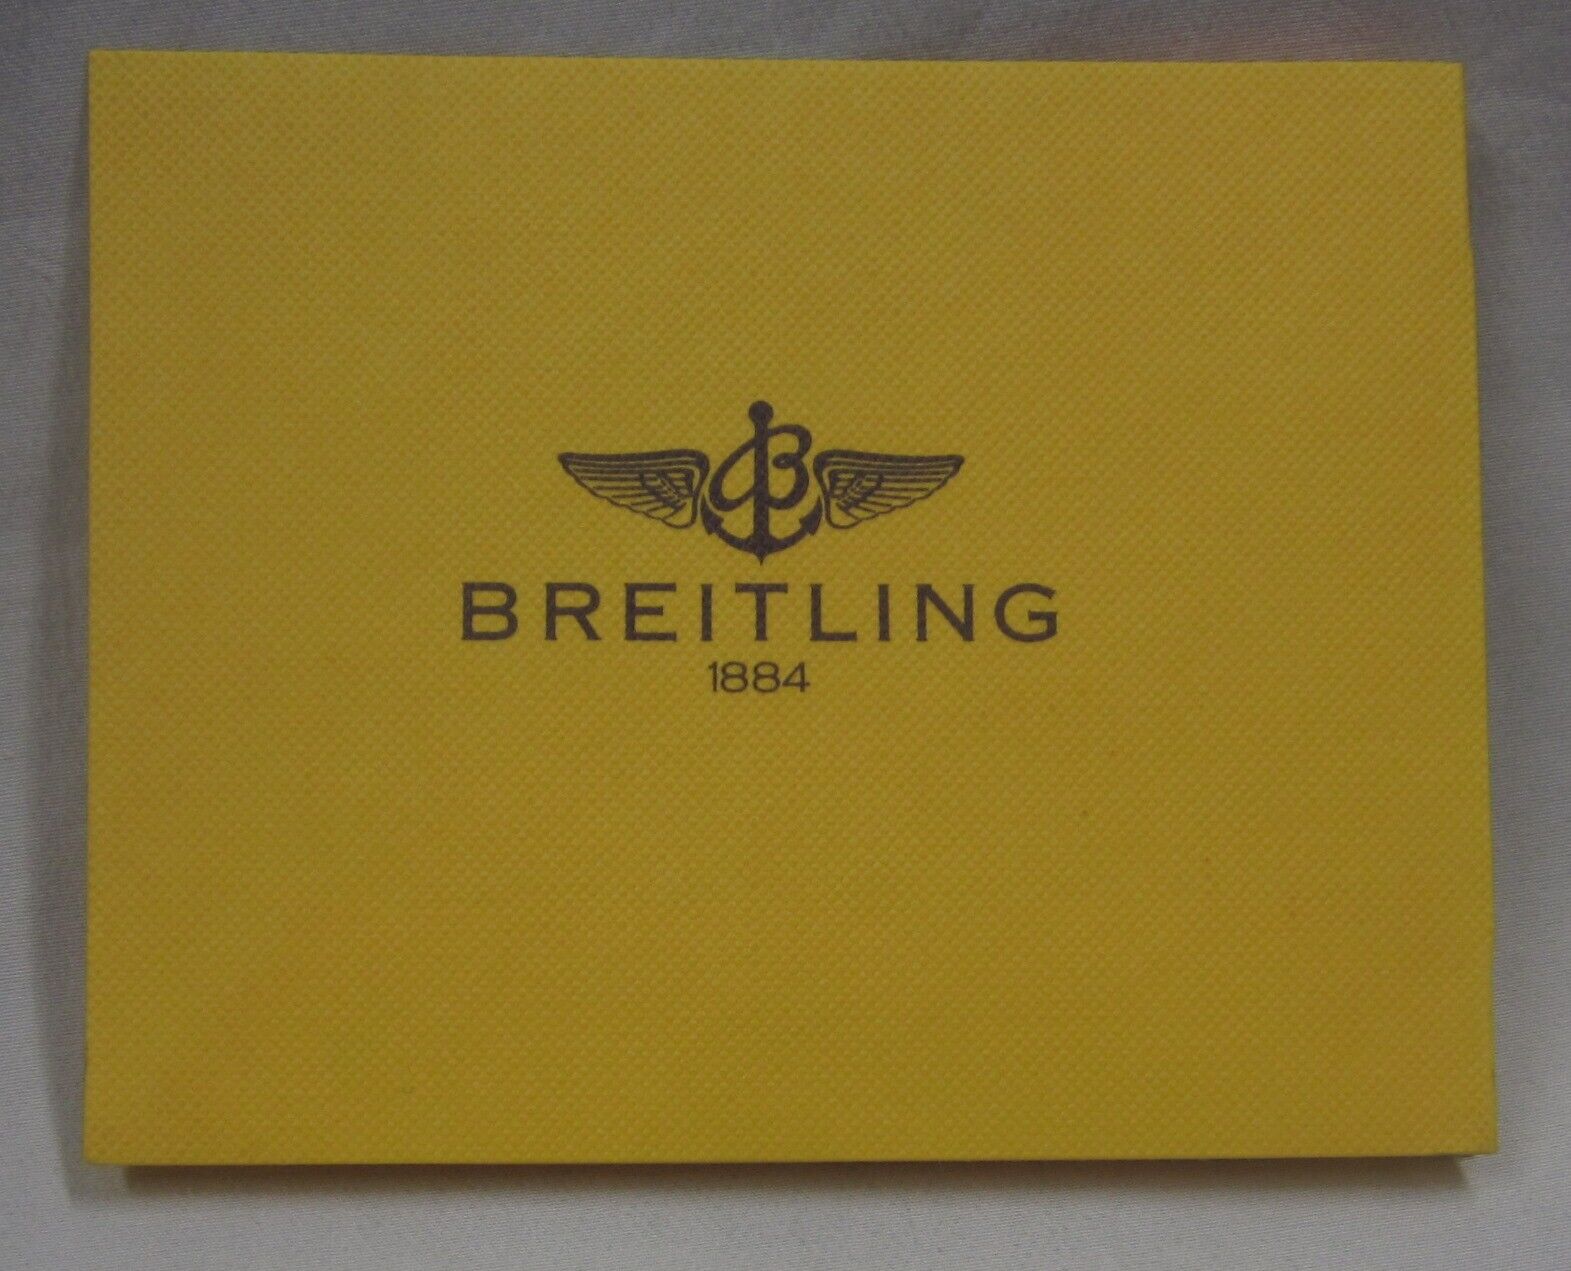 Empty BREITLING Watch Documents Sleeve for Warrantee Certificat and Other Papers